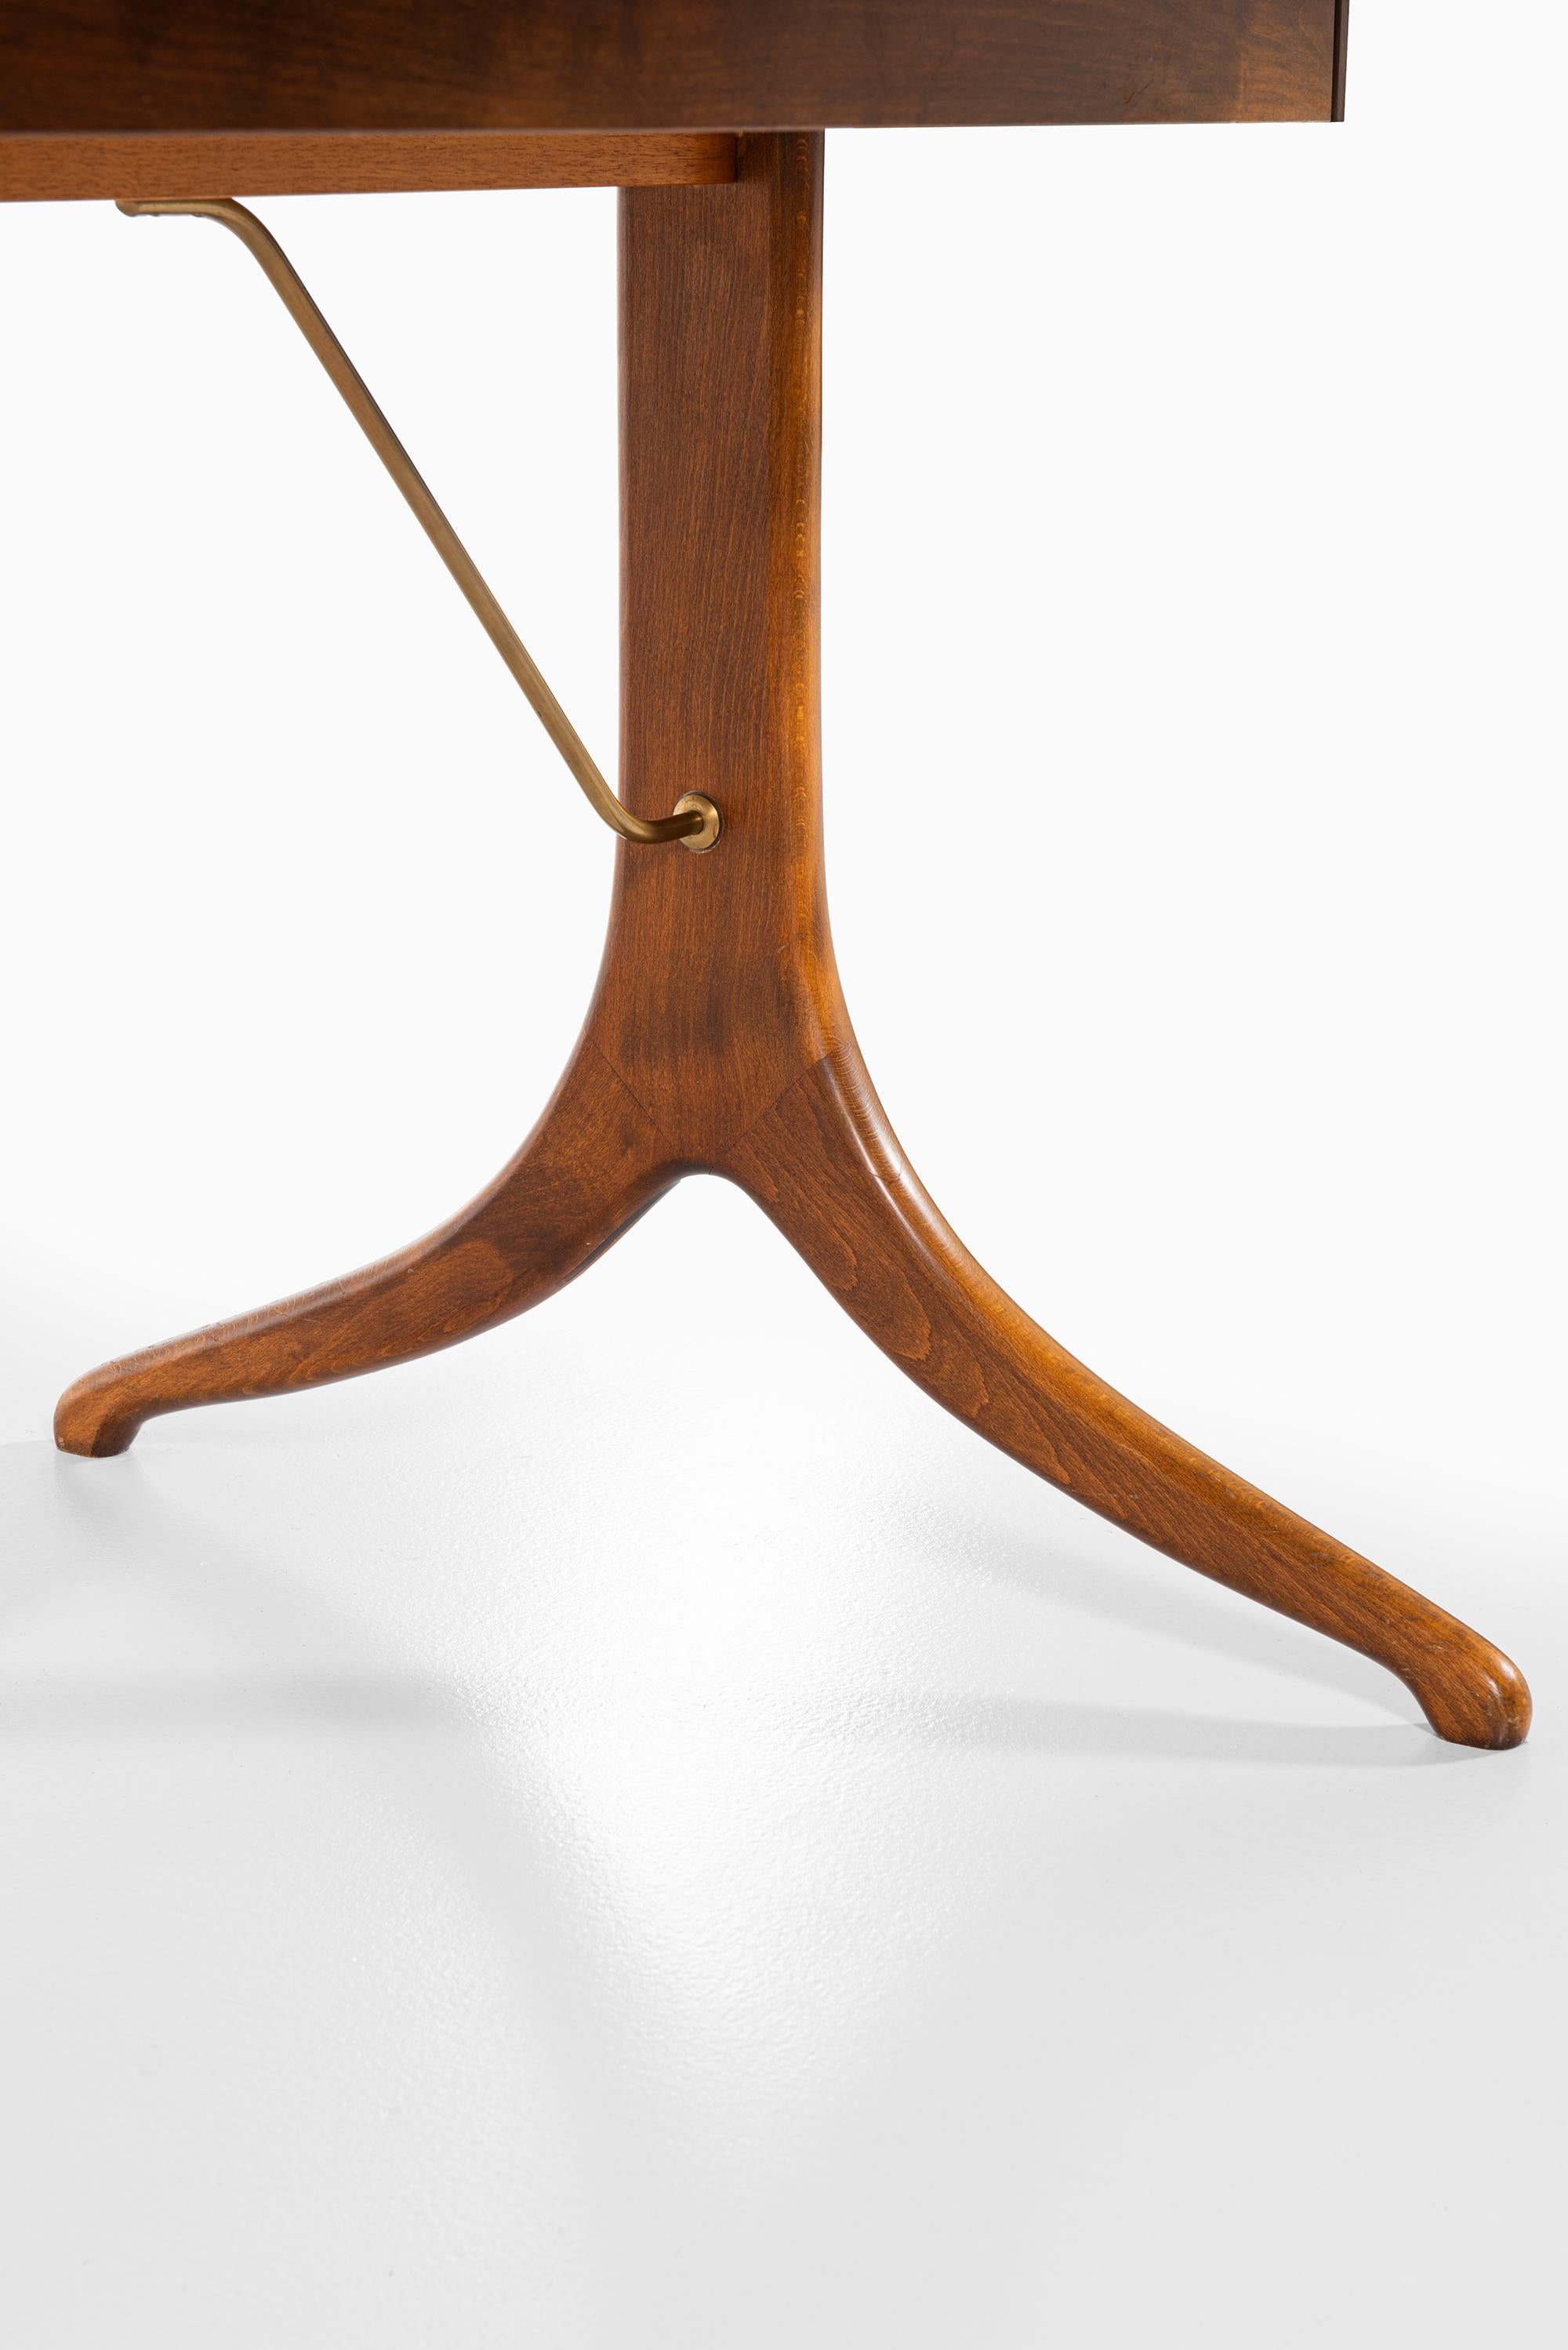 Scandinavian Modern Dining Table Attributed to David Rosén Produced in Sweden